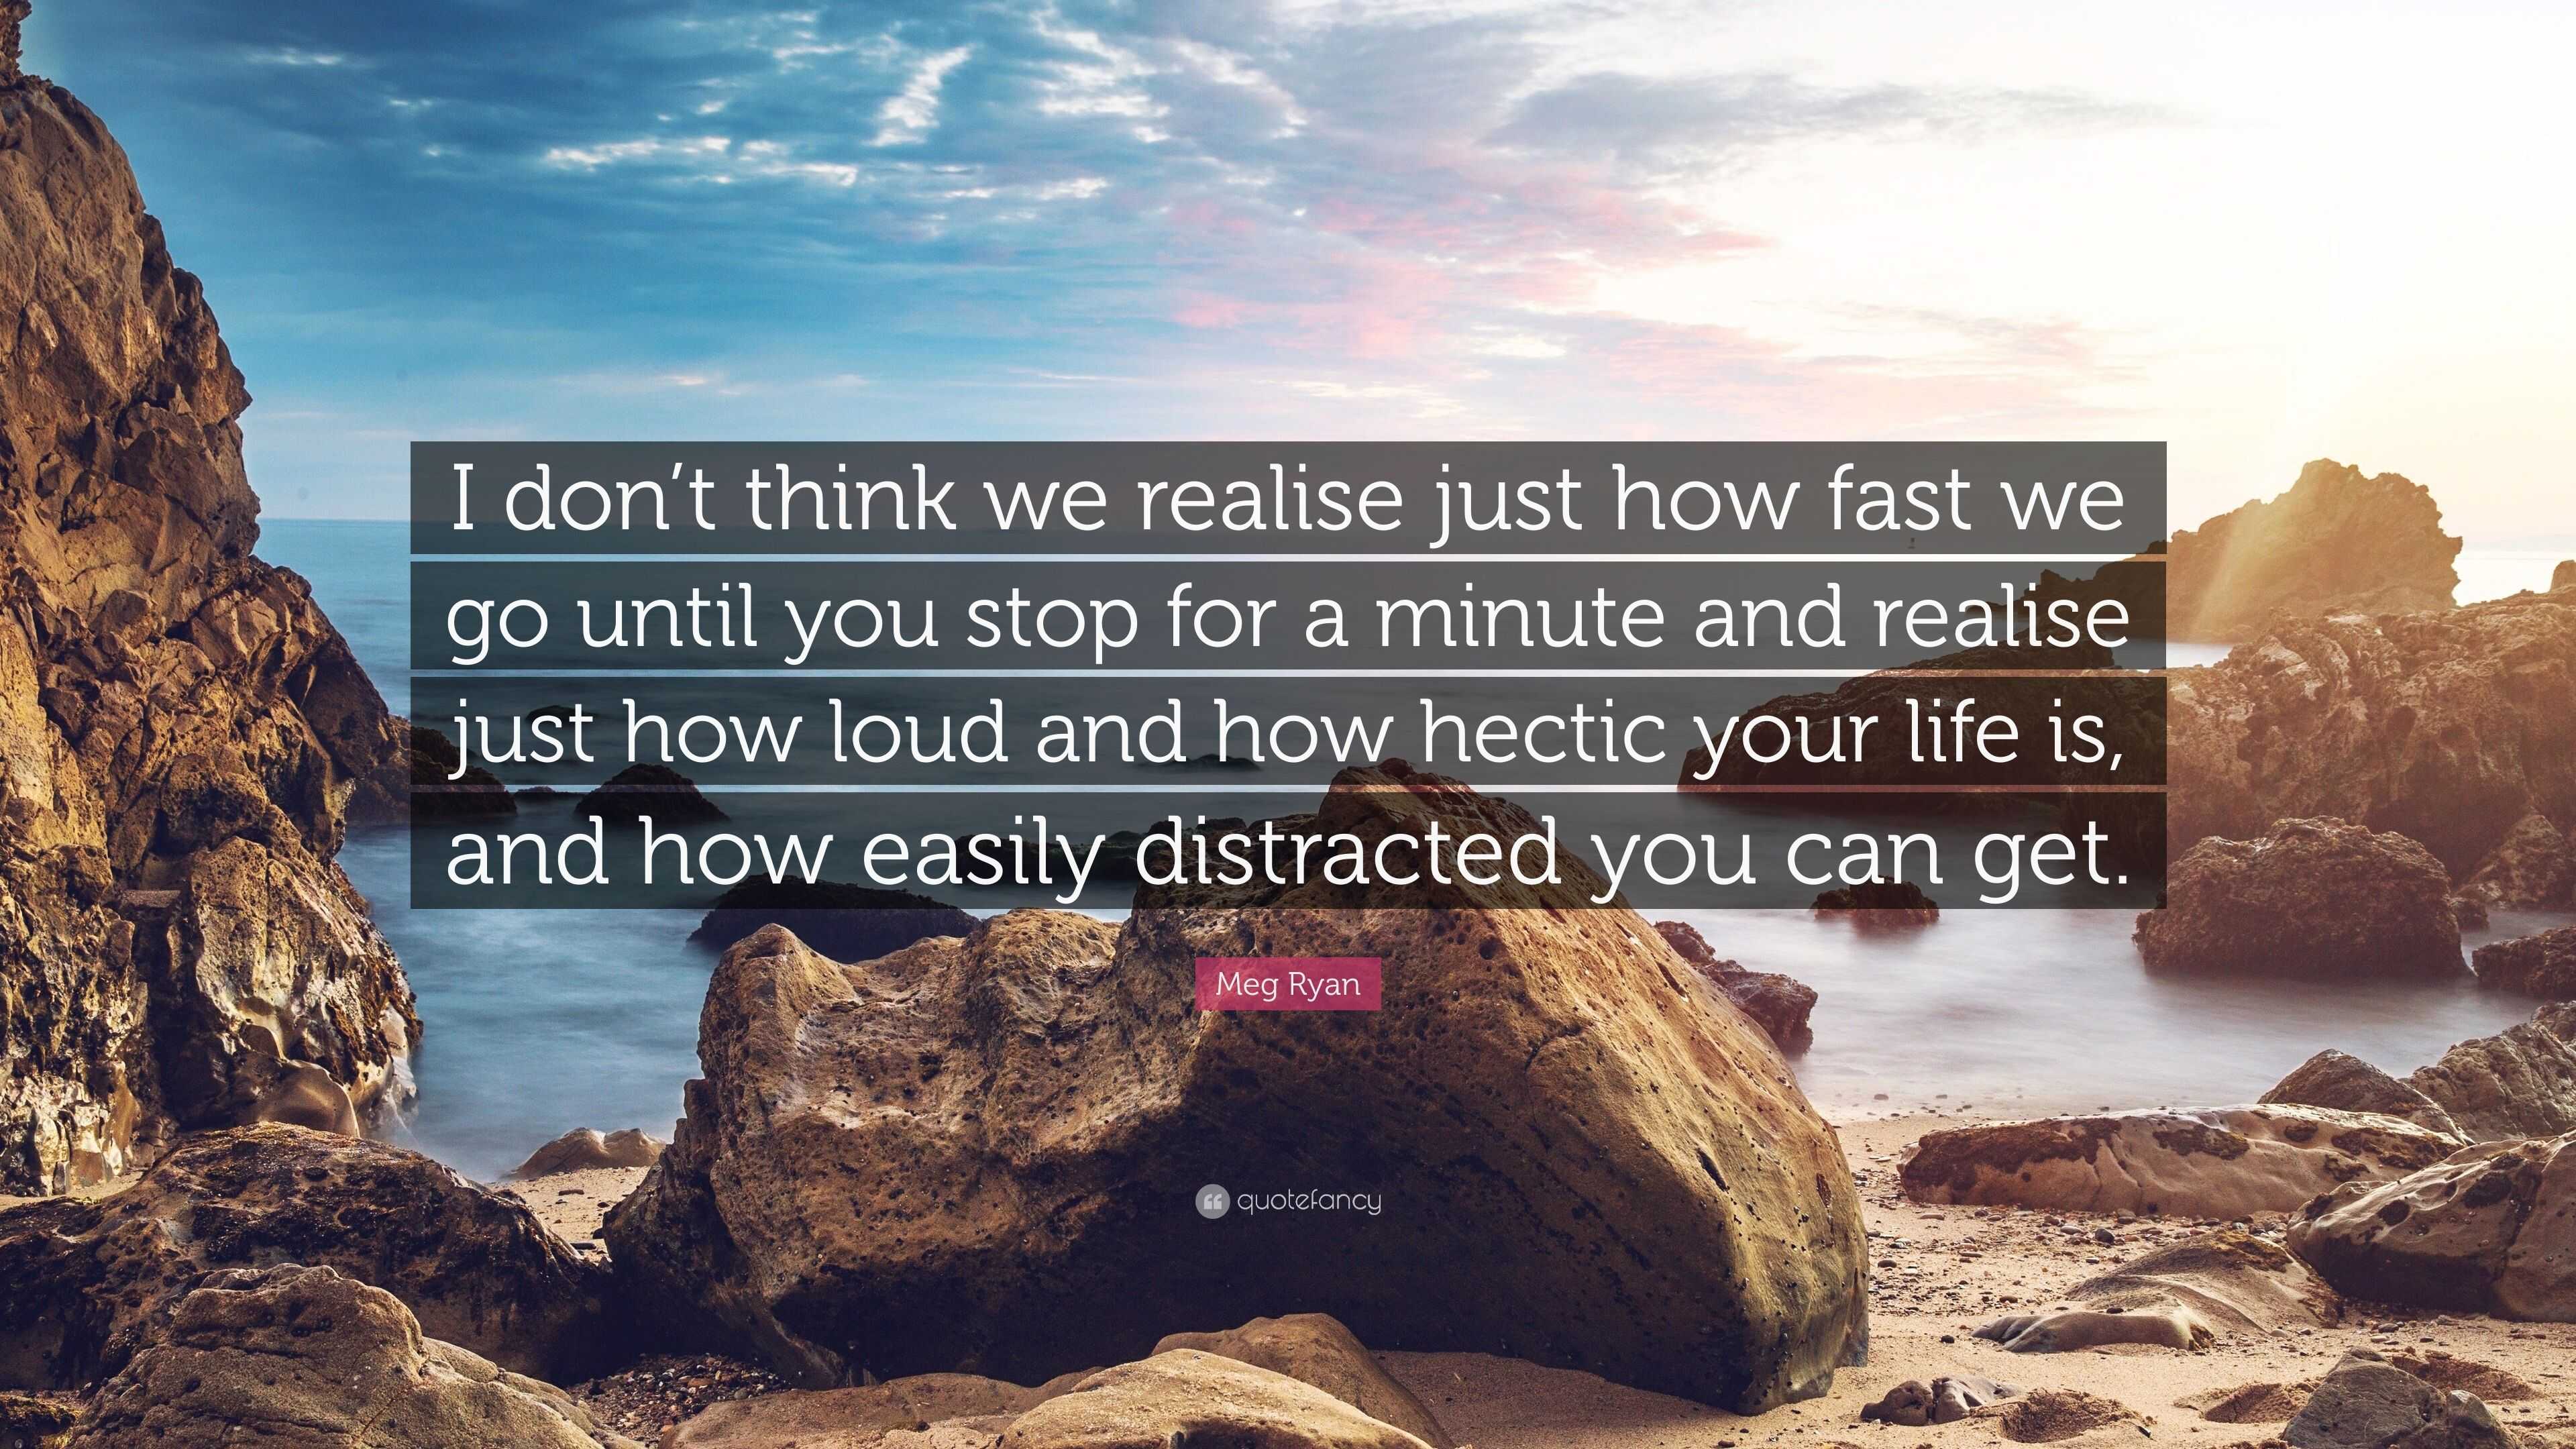 Meg Ryan Quote: “I don't think we realise just how fast we go until you  stop for a minute and realise just how loud and how hectic your l...”